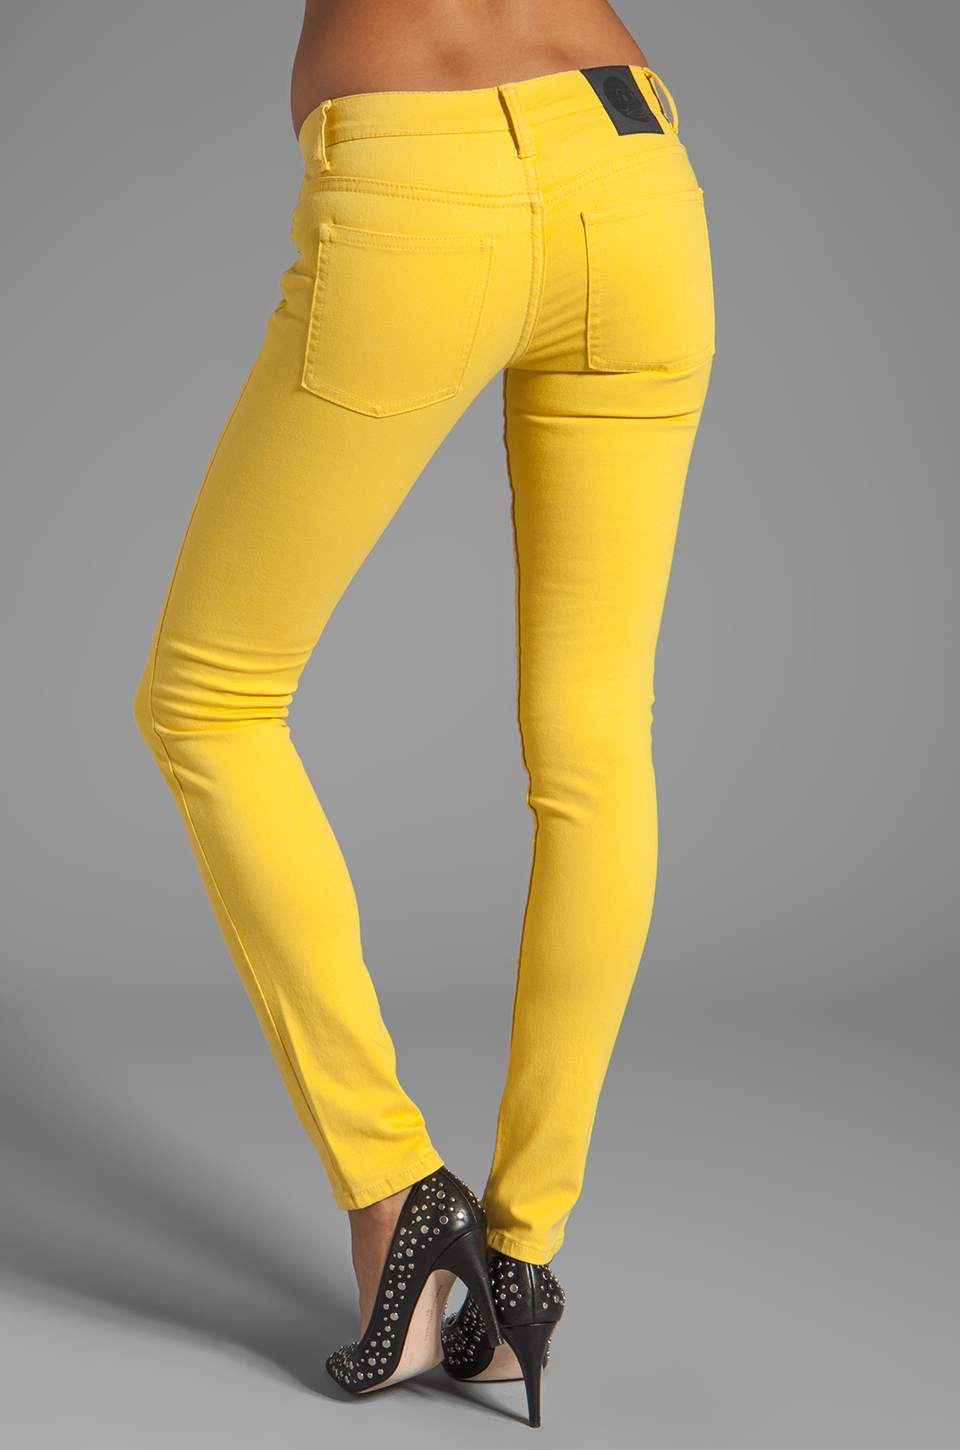 Cheap Monday Narrow Jeans in Bright Yellow | Lyst